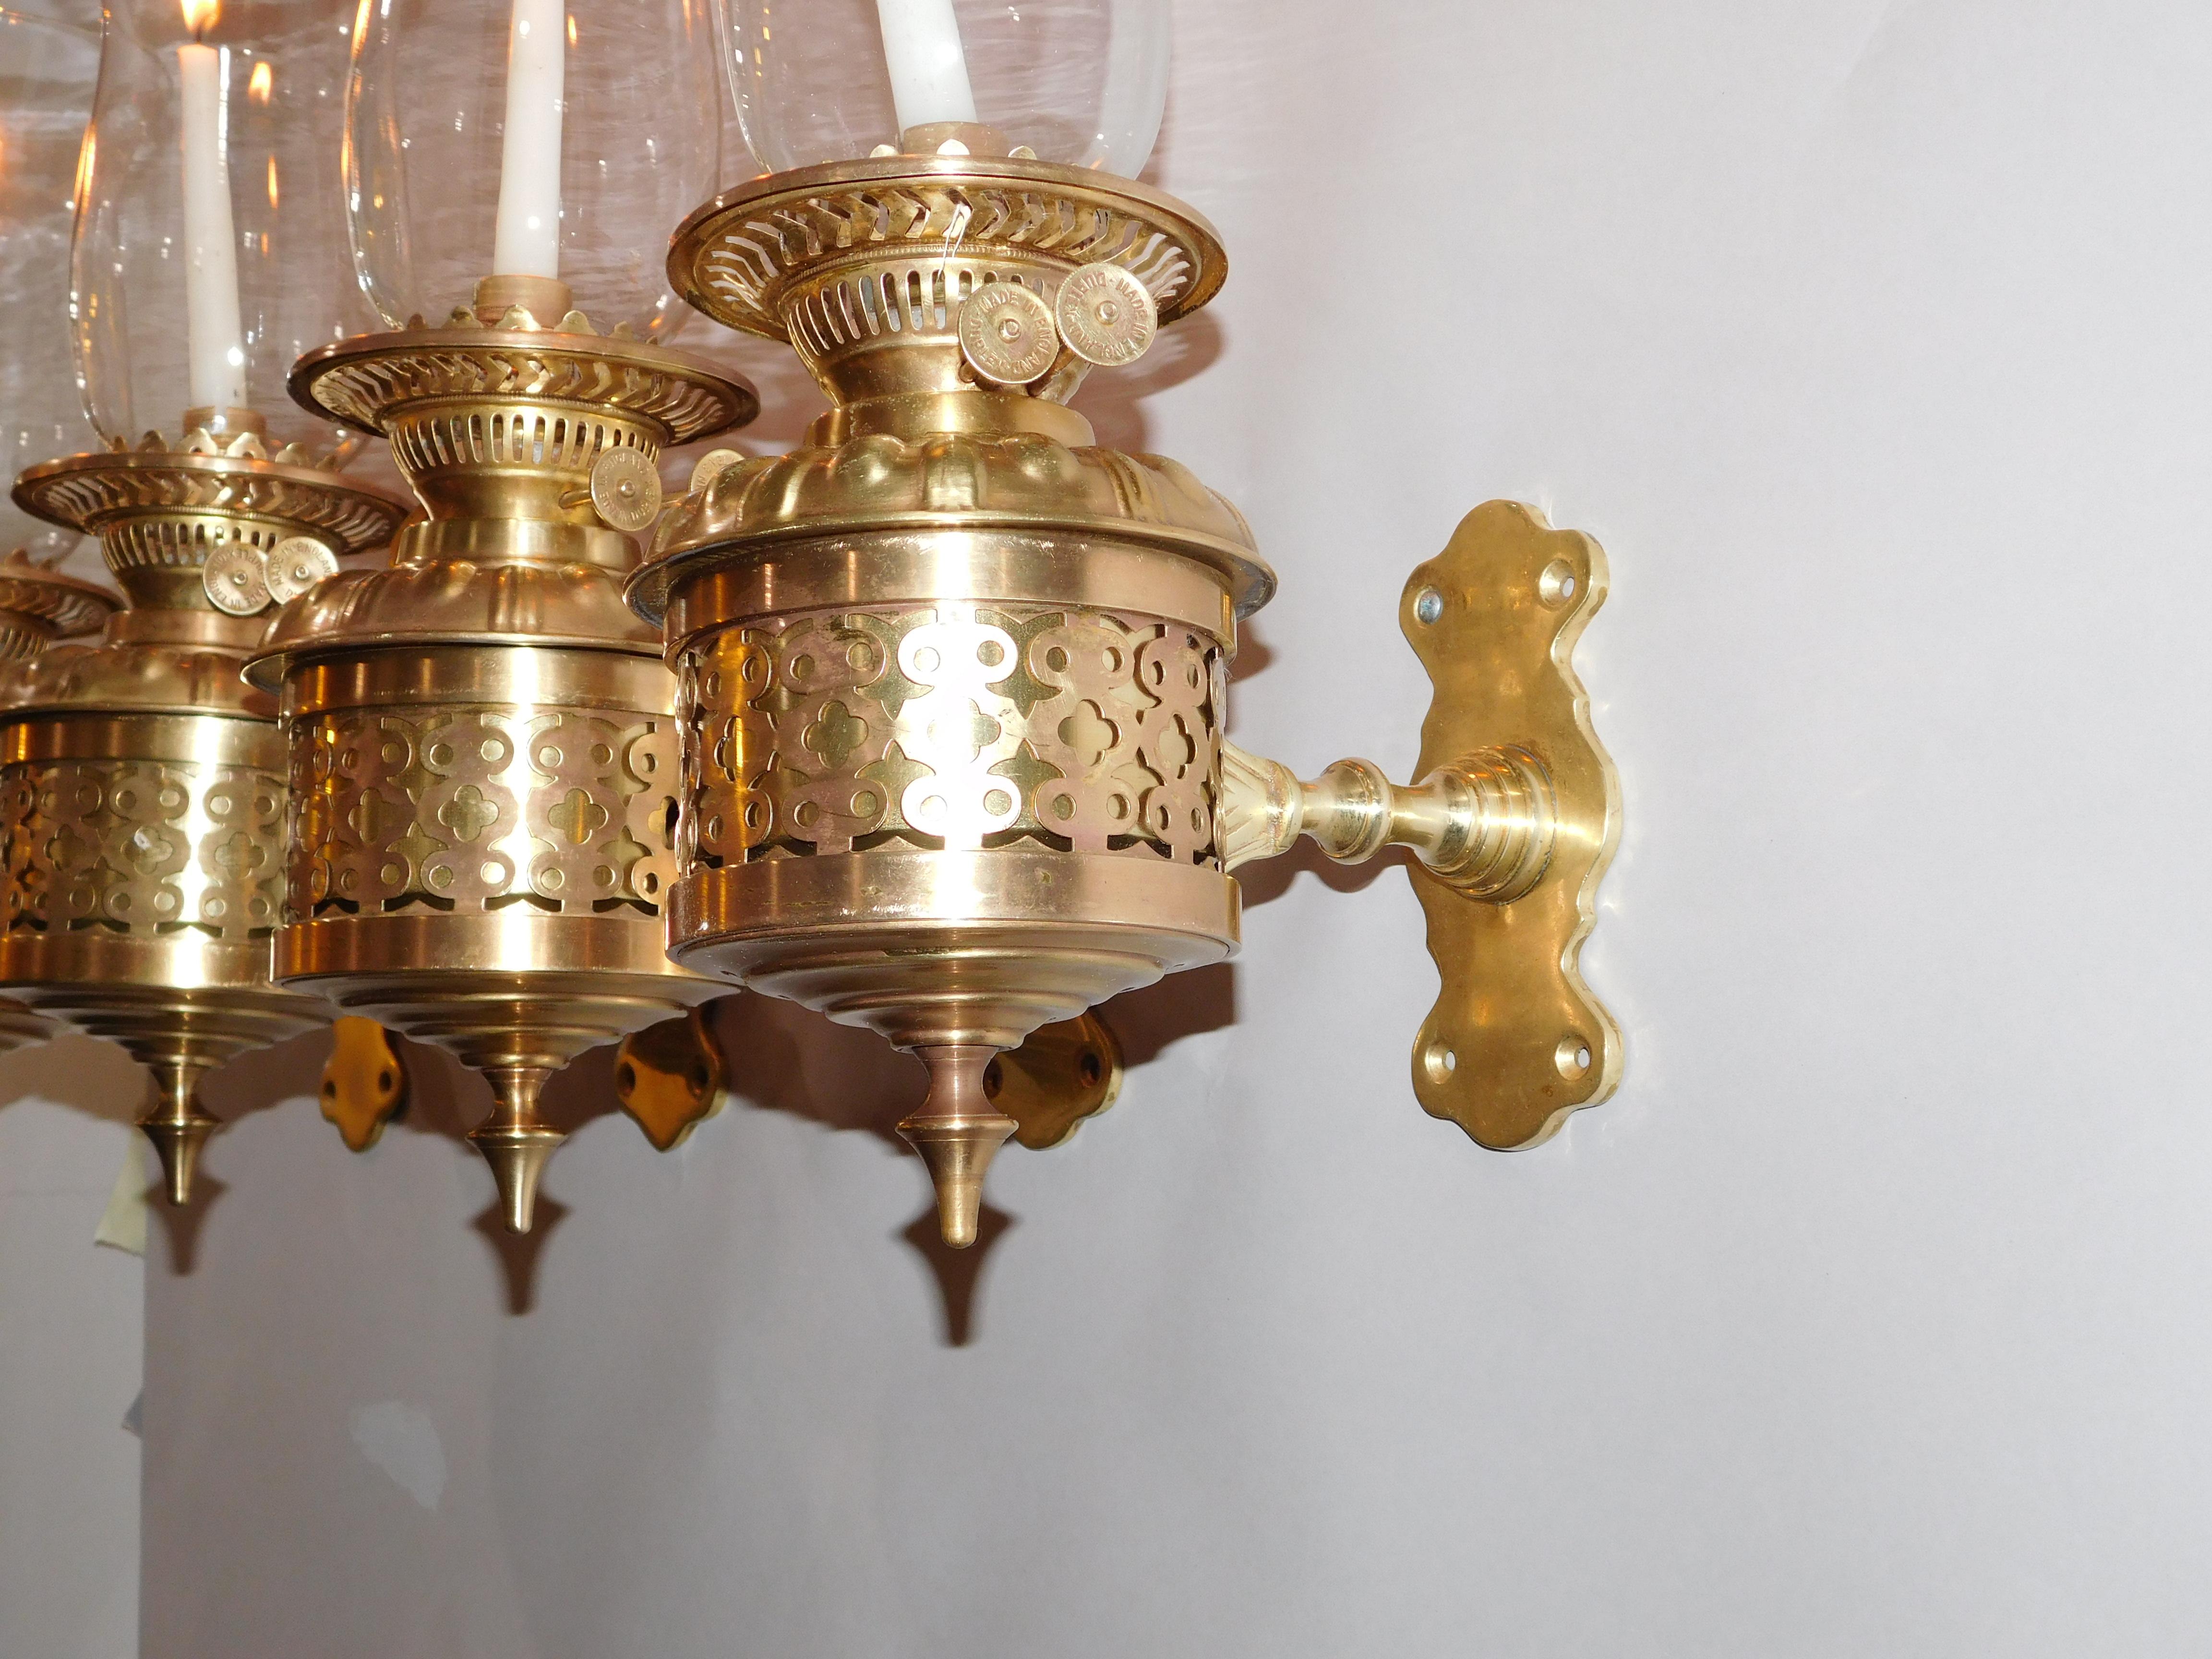 Repoussé Set of 4 Brass and Bronze Candle Hurricane Lantern Sconces, England, 1890 For Sale